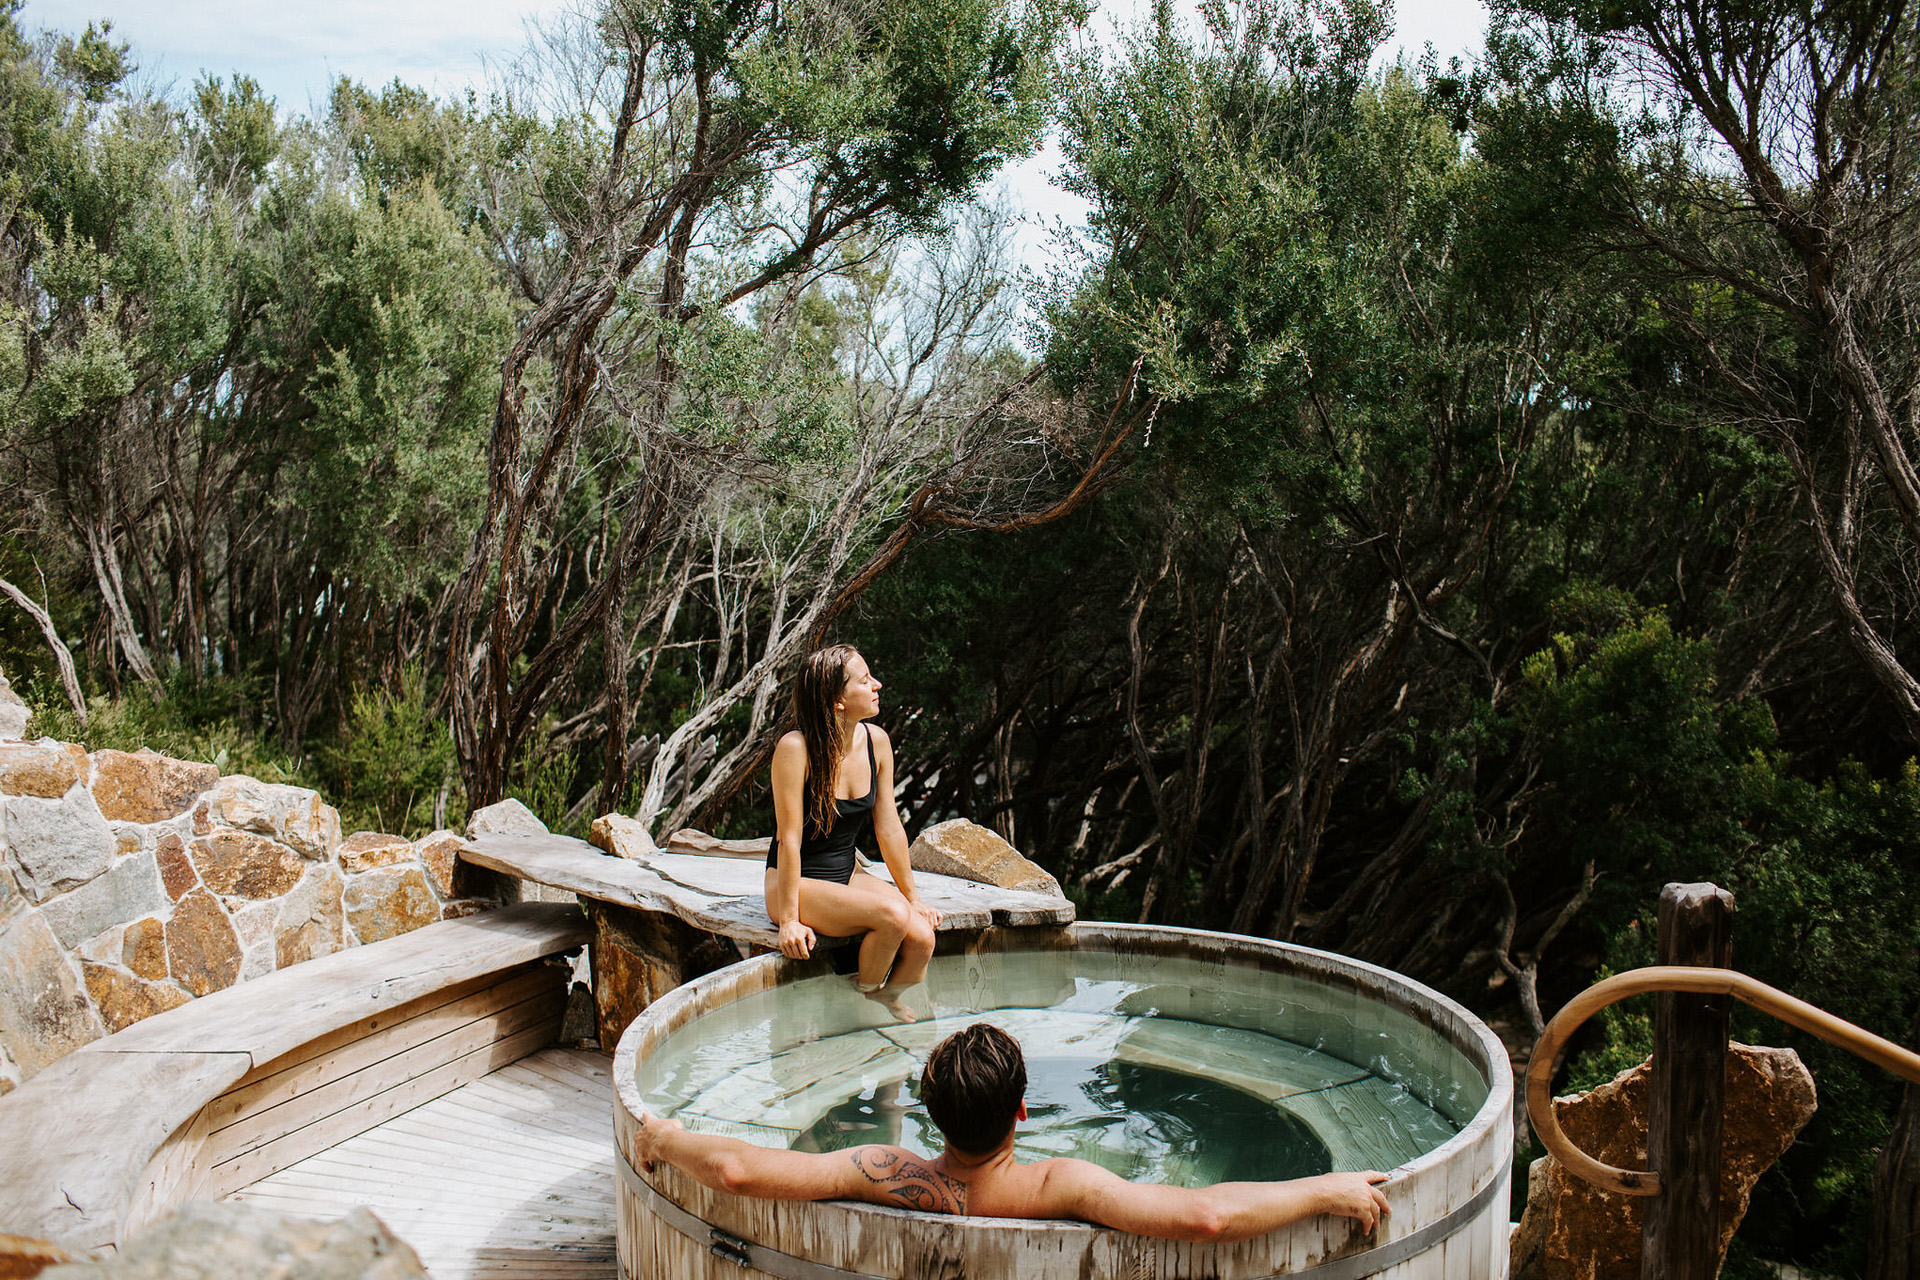 Soaking In The Views: Australia's Great Victorian Bathing Trail